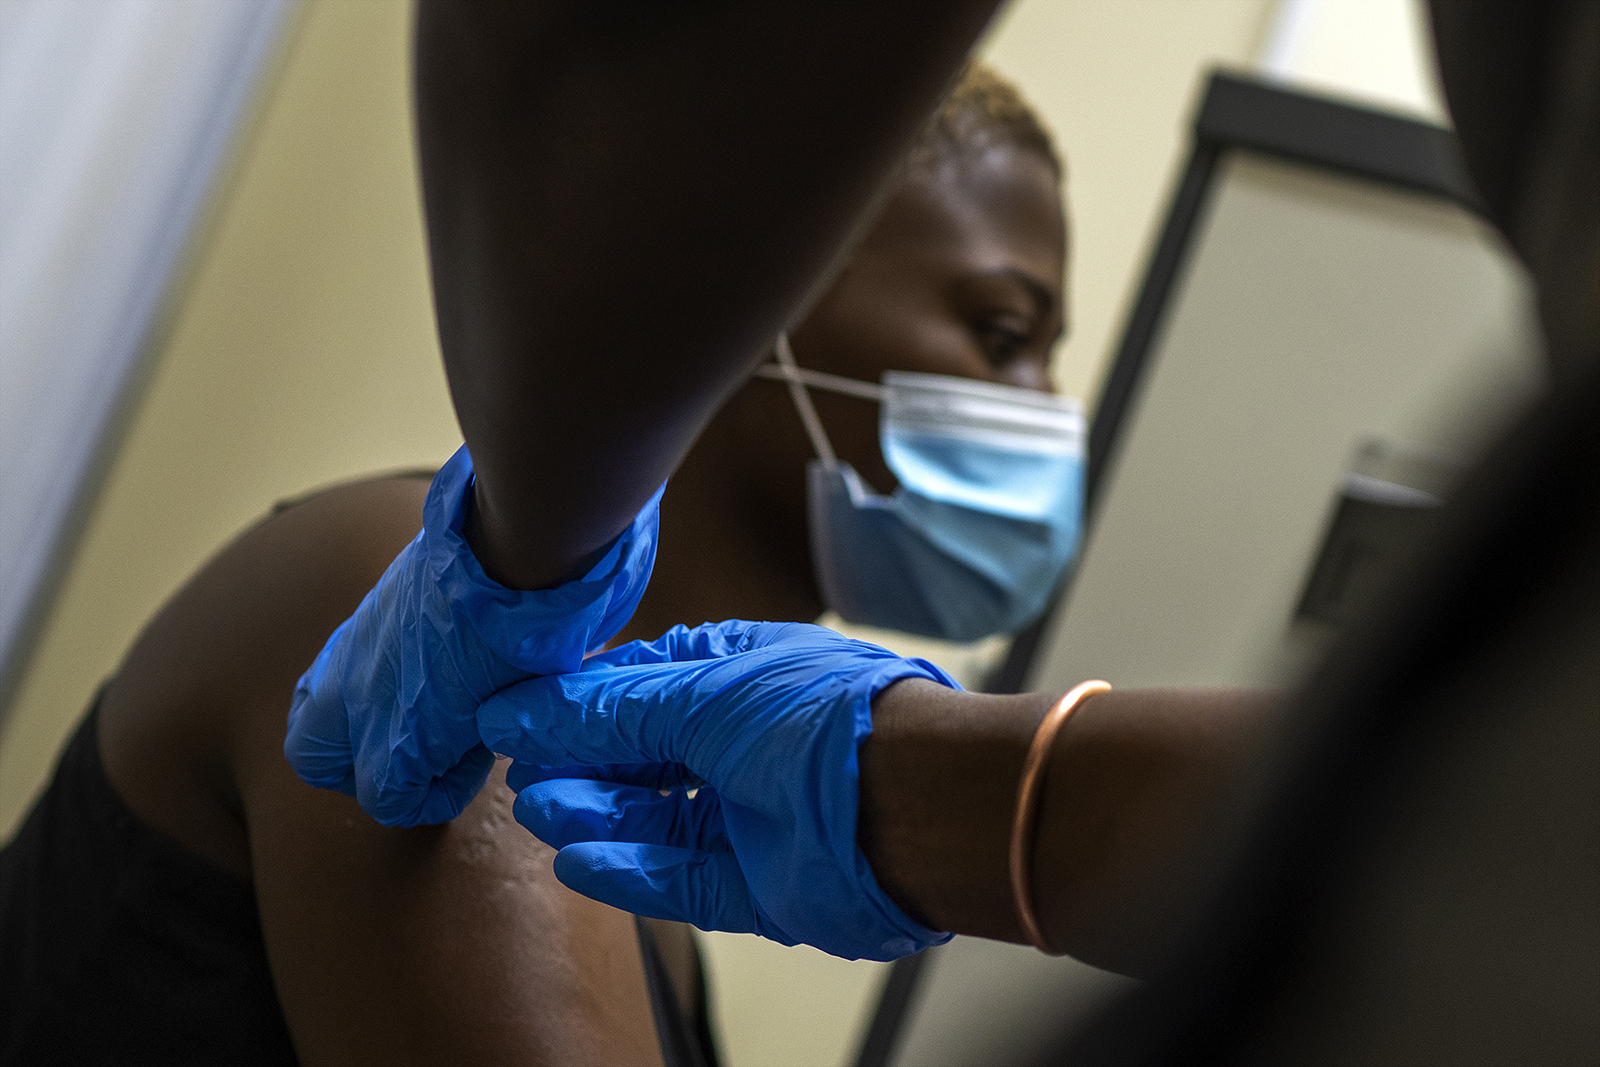 Thabisle Khlatshwayo receives her second shot at a vaccine trial facility for AstraZeneca at Soweto's Chris Sani Baragwanath Hospital outside Johannesburg, South Africa, on Monday, November 30, 2020.